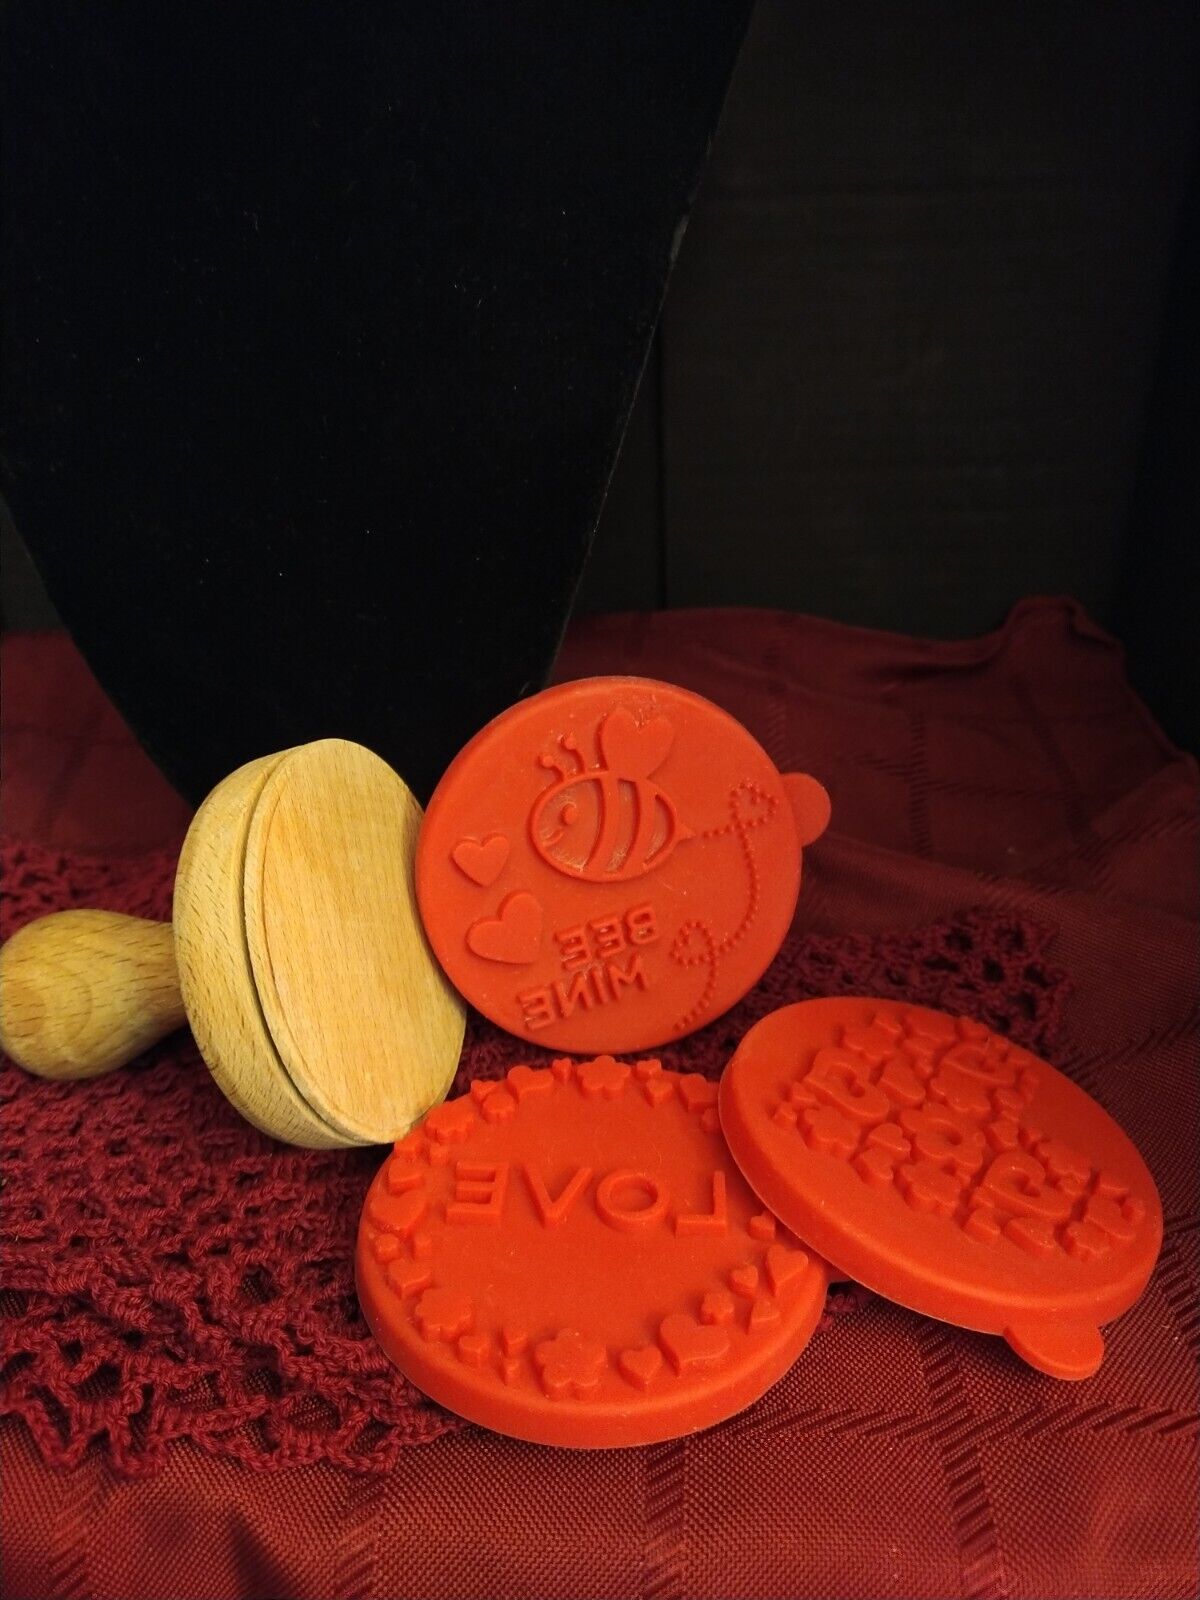 Cookie or Clay Stamp 3 Set Wood and Silicone Valentine/Love Theme